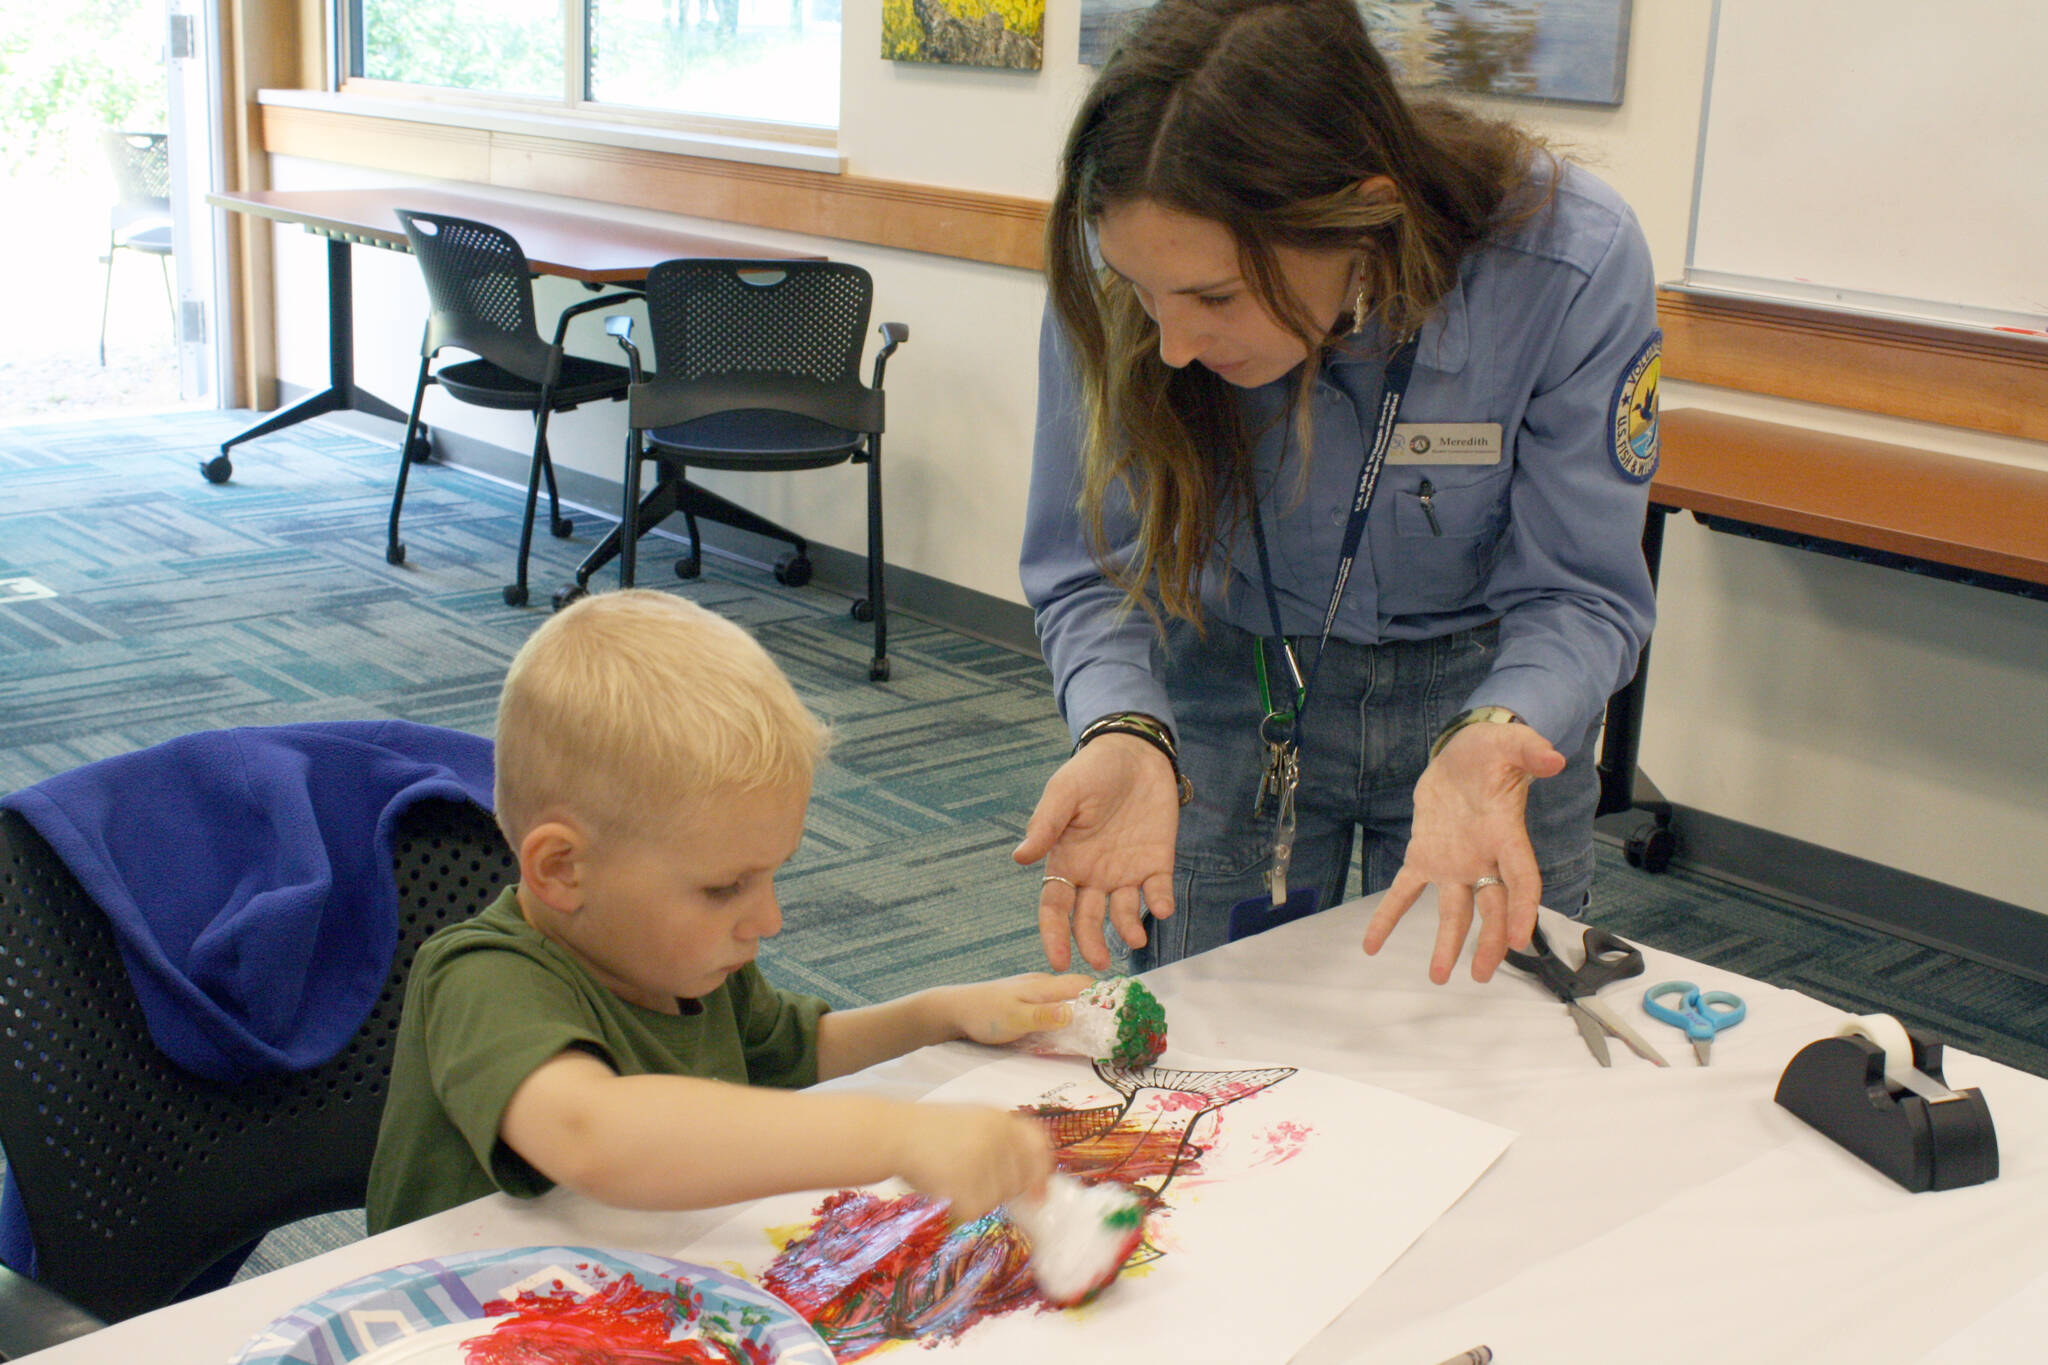 Environmental Education and Visitor Services Intern Meredith Baker helps Blake Voss, 3, paint during Fish Week at the Kenai National Wildlife Refuge in Soldotna, Alaska, on Monday, July 18, 2022. (Camille Botello/Peninsula Clarion)